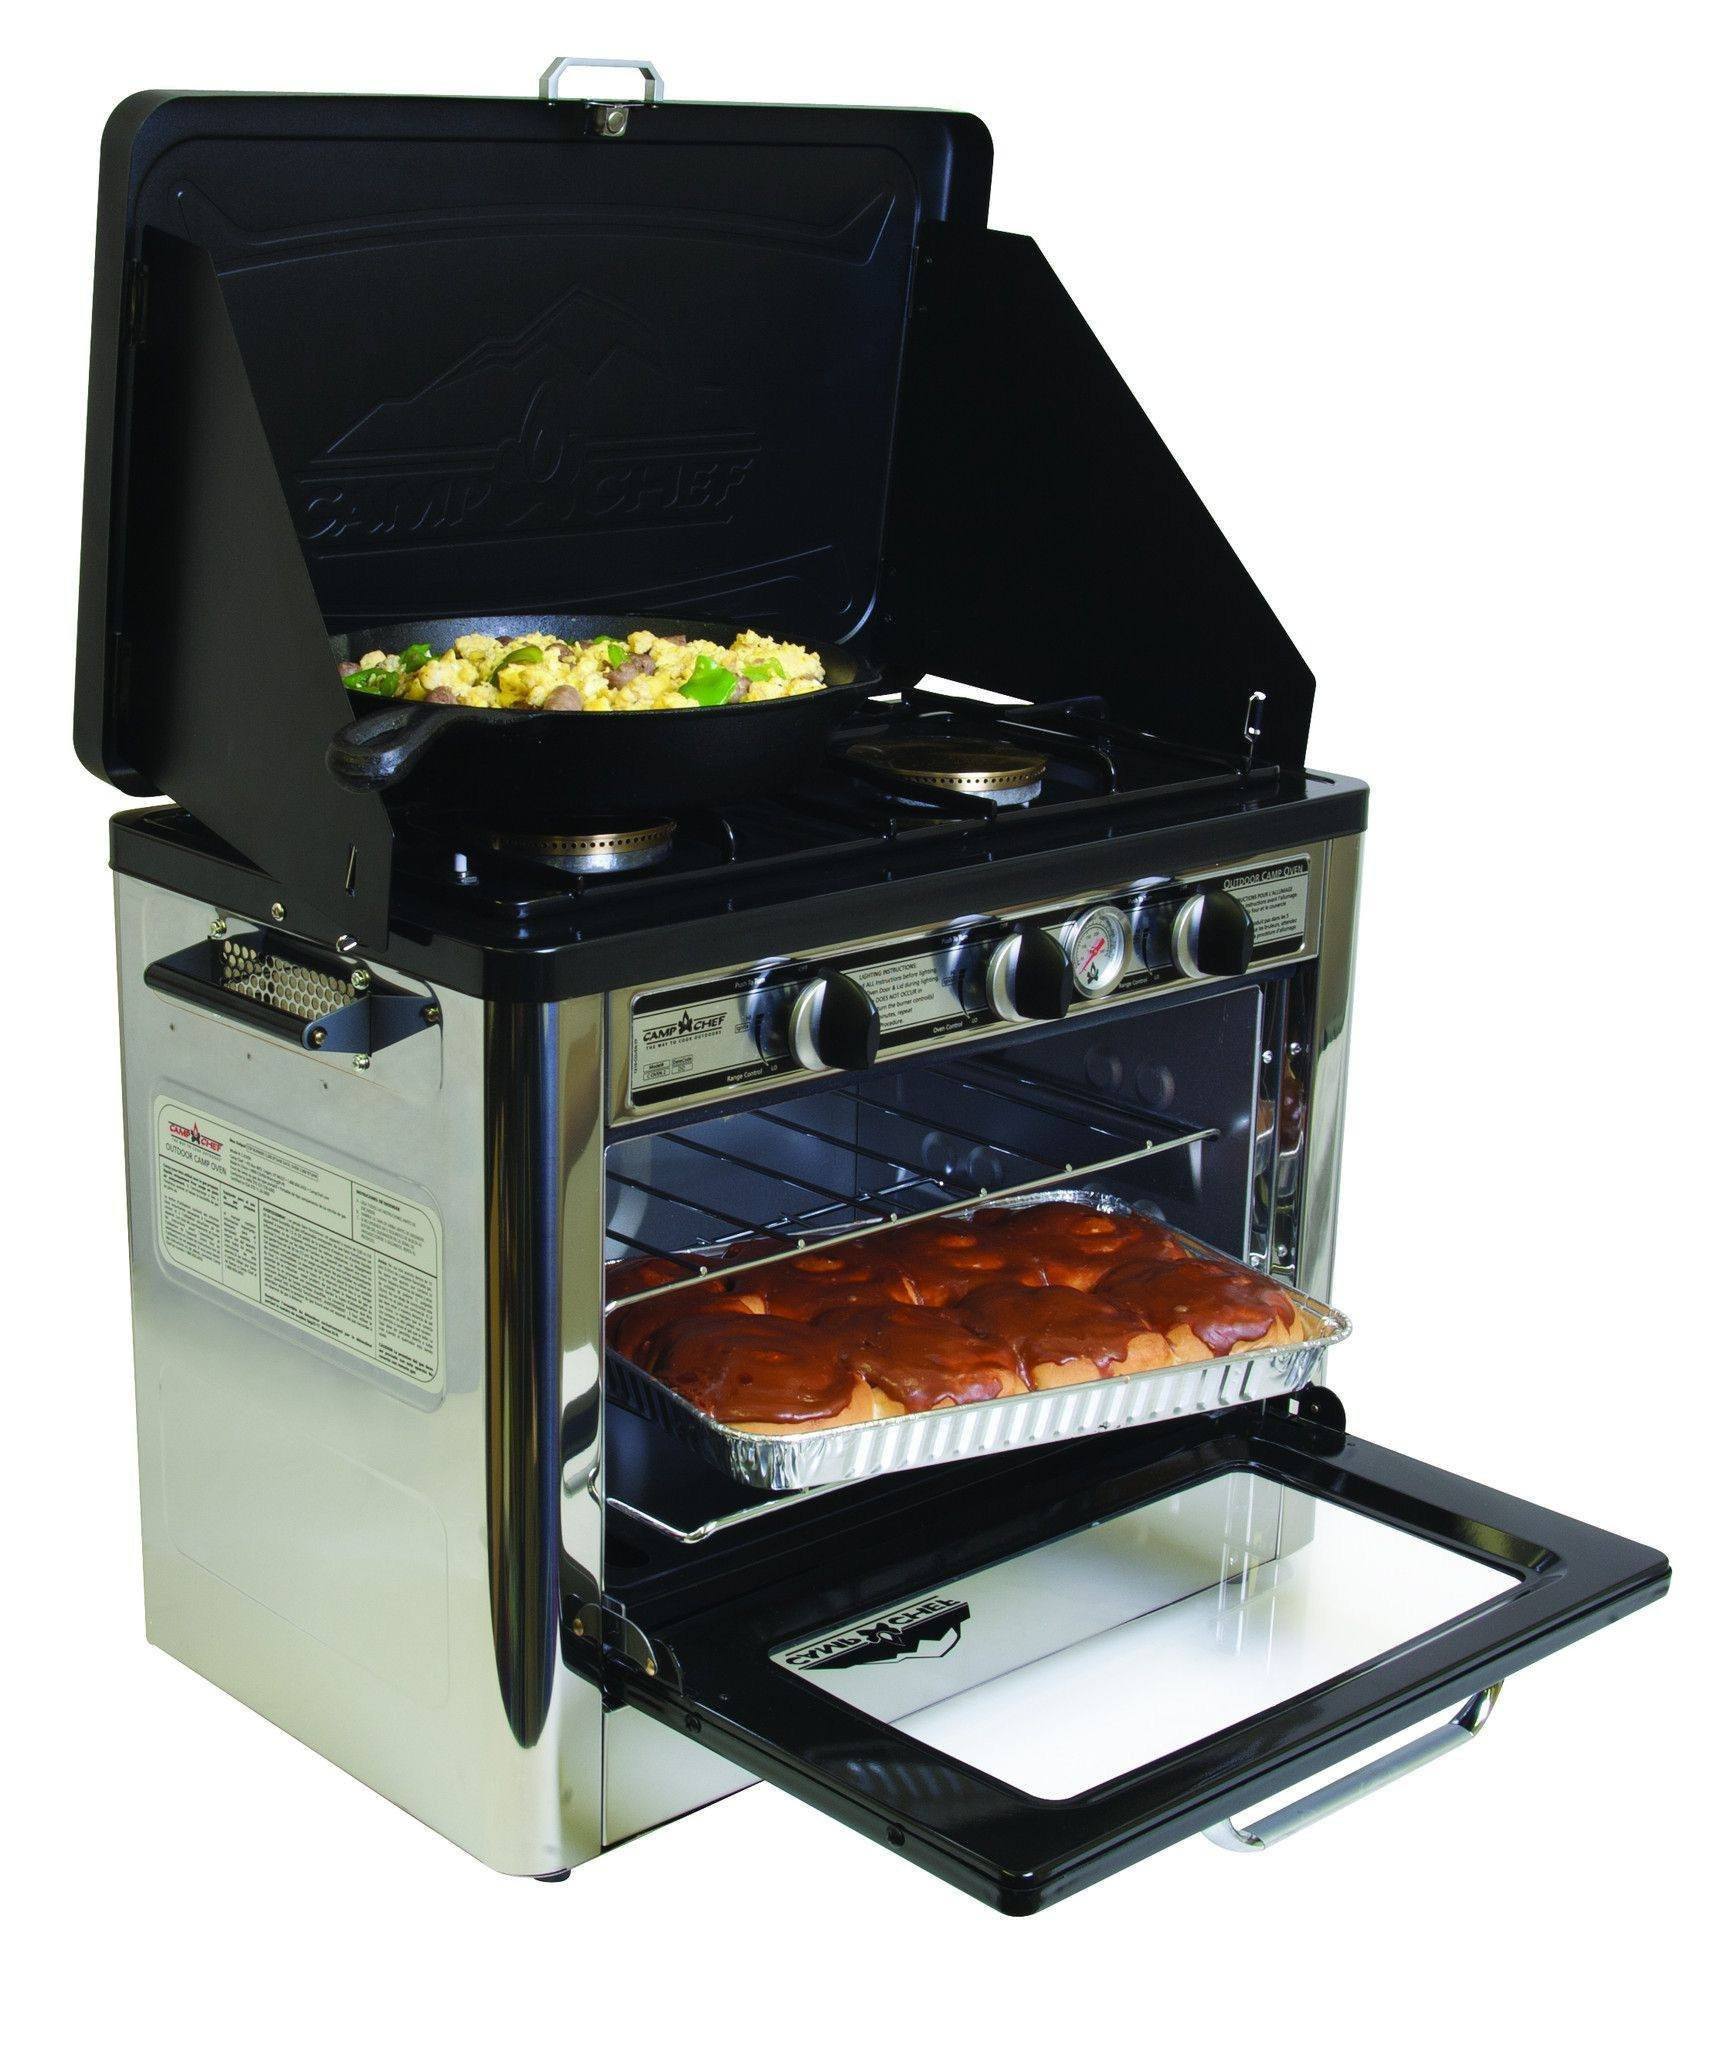 Camp Chef Deluxe Outdoor Oven camping cooking gear 